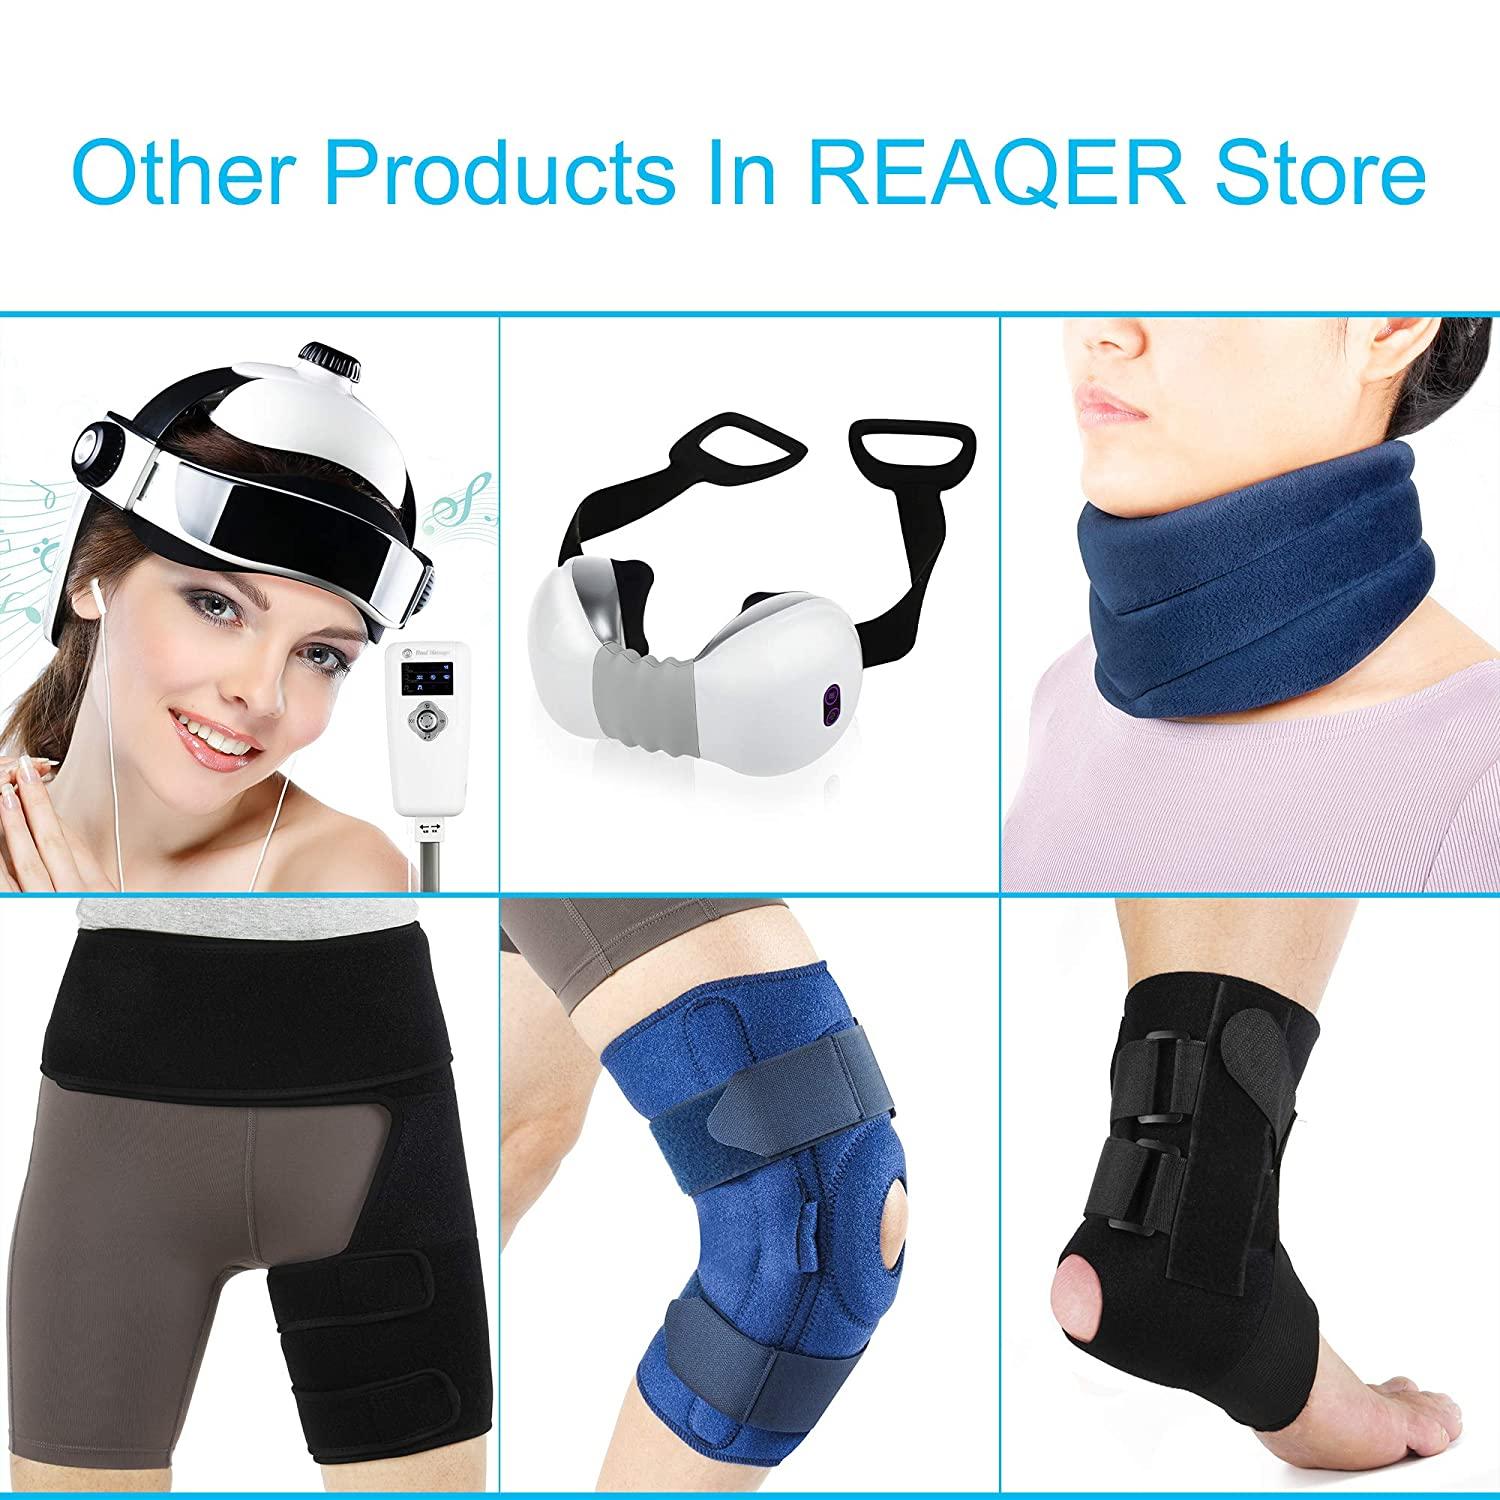 Thigh Compression Support - The Bone Store